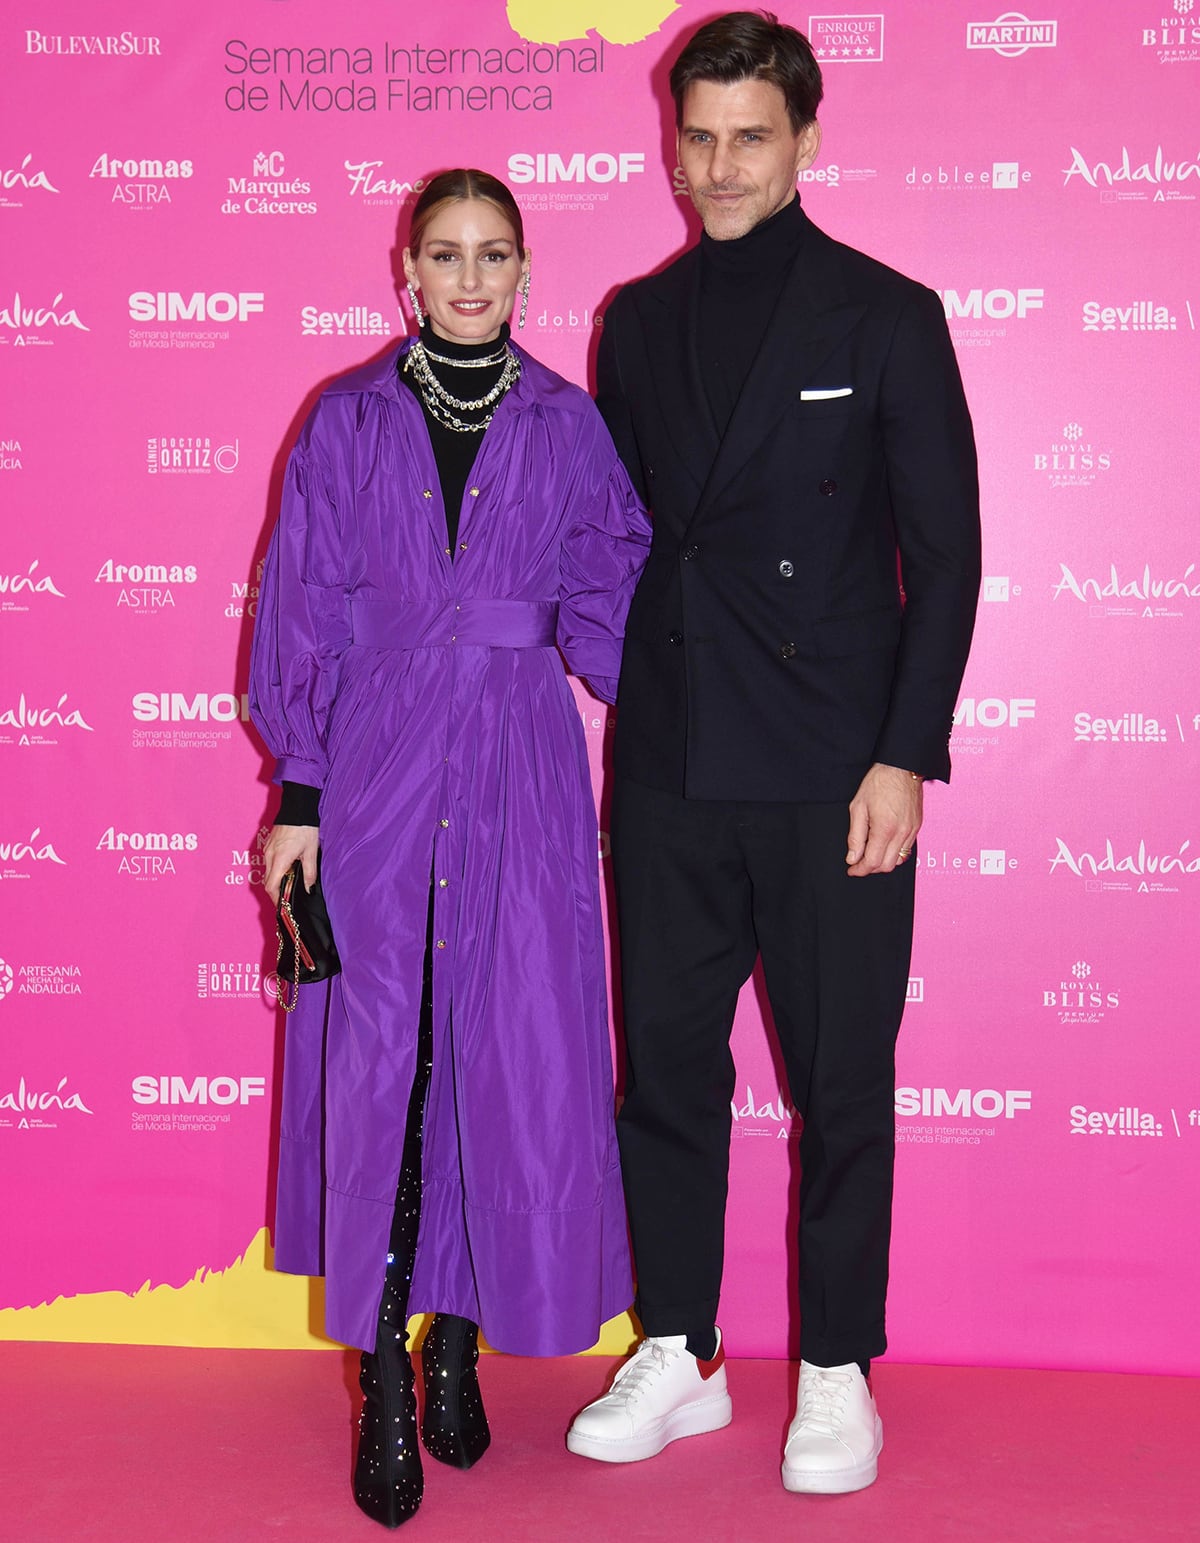 Olivia Palermo and her husband Johannes Huebl attend the launch of the 2023 Semana De Moda Flamenca (SIMOF) in Seville, Spain on January 26, 2023